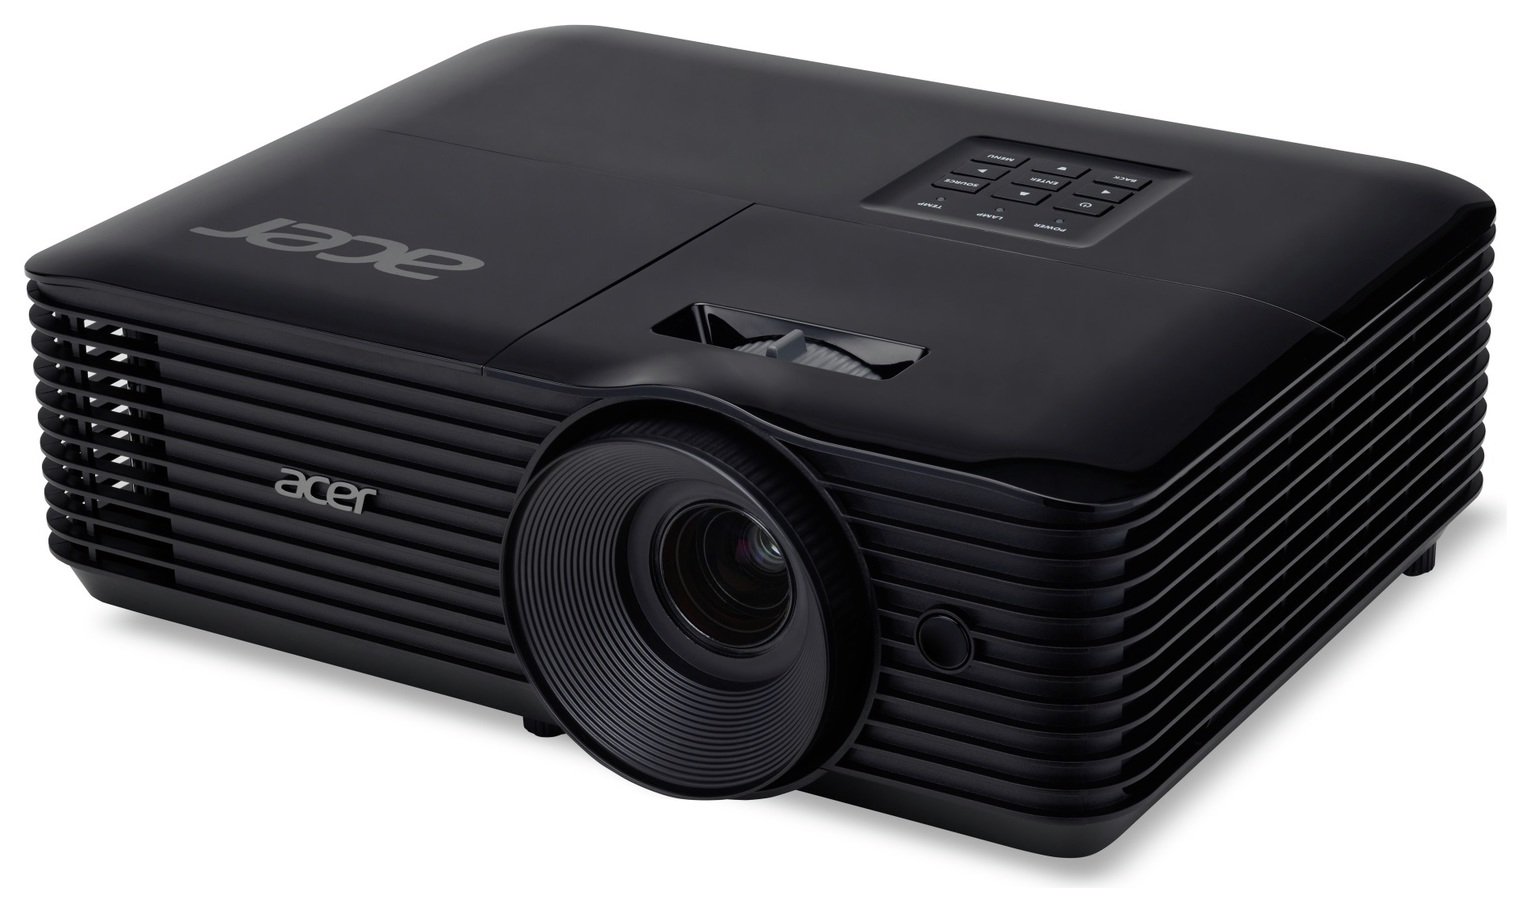 Download Acer X118H 3D SVGA Projector Reviews